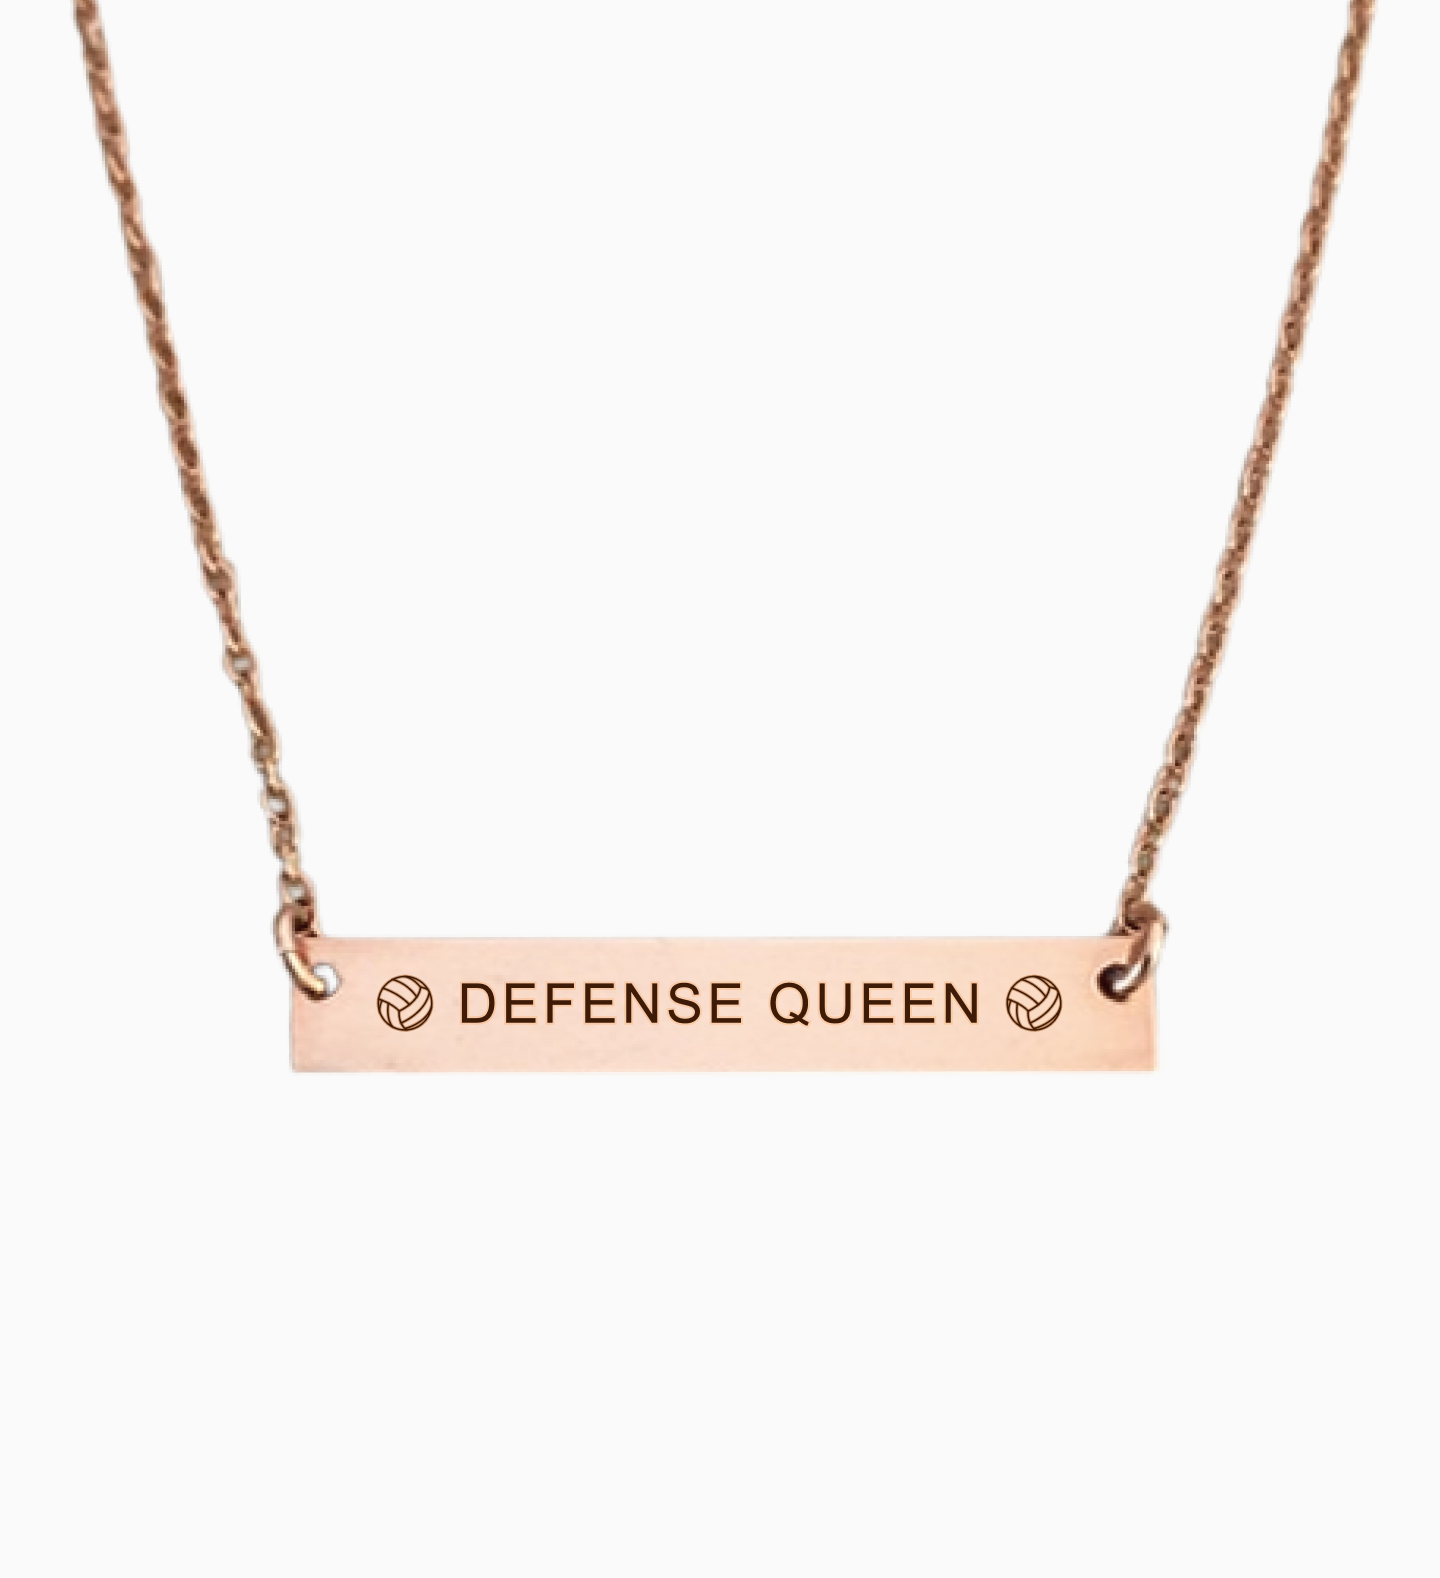 Defense Queen - Volleyball Position Engraved Necklace Bar